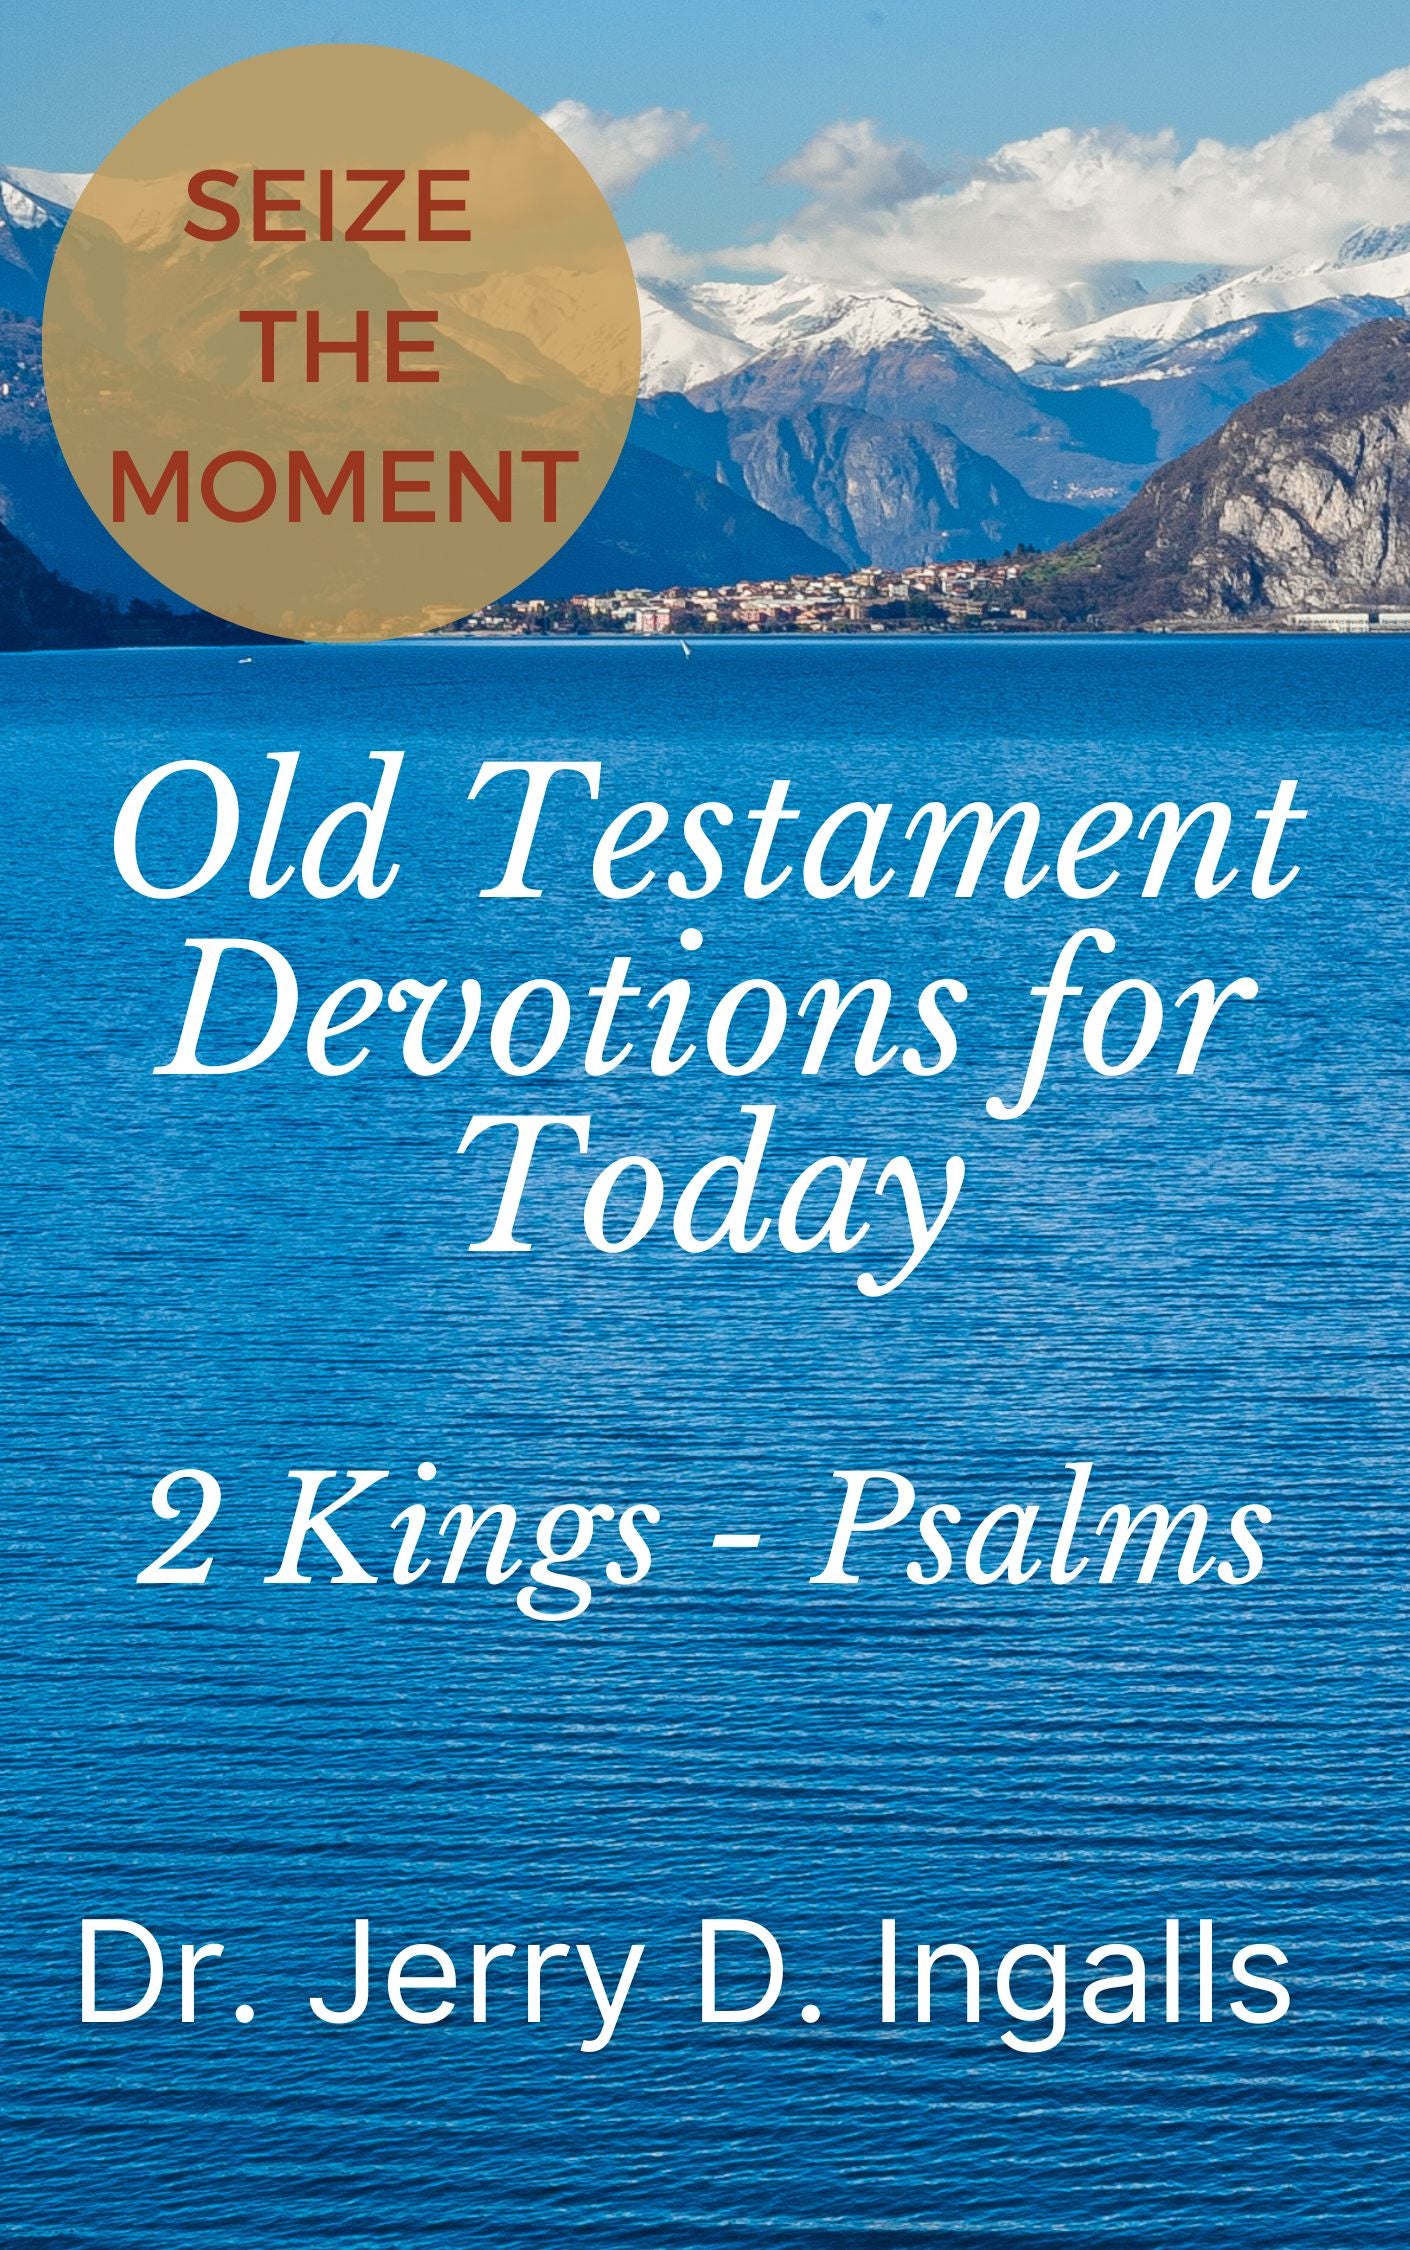 Seize the Moment III: Old Testament Devotions for Today (2 Kings - Psalms)